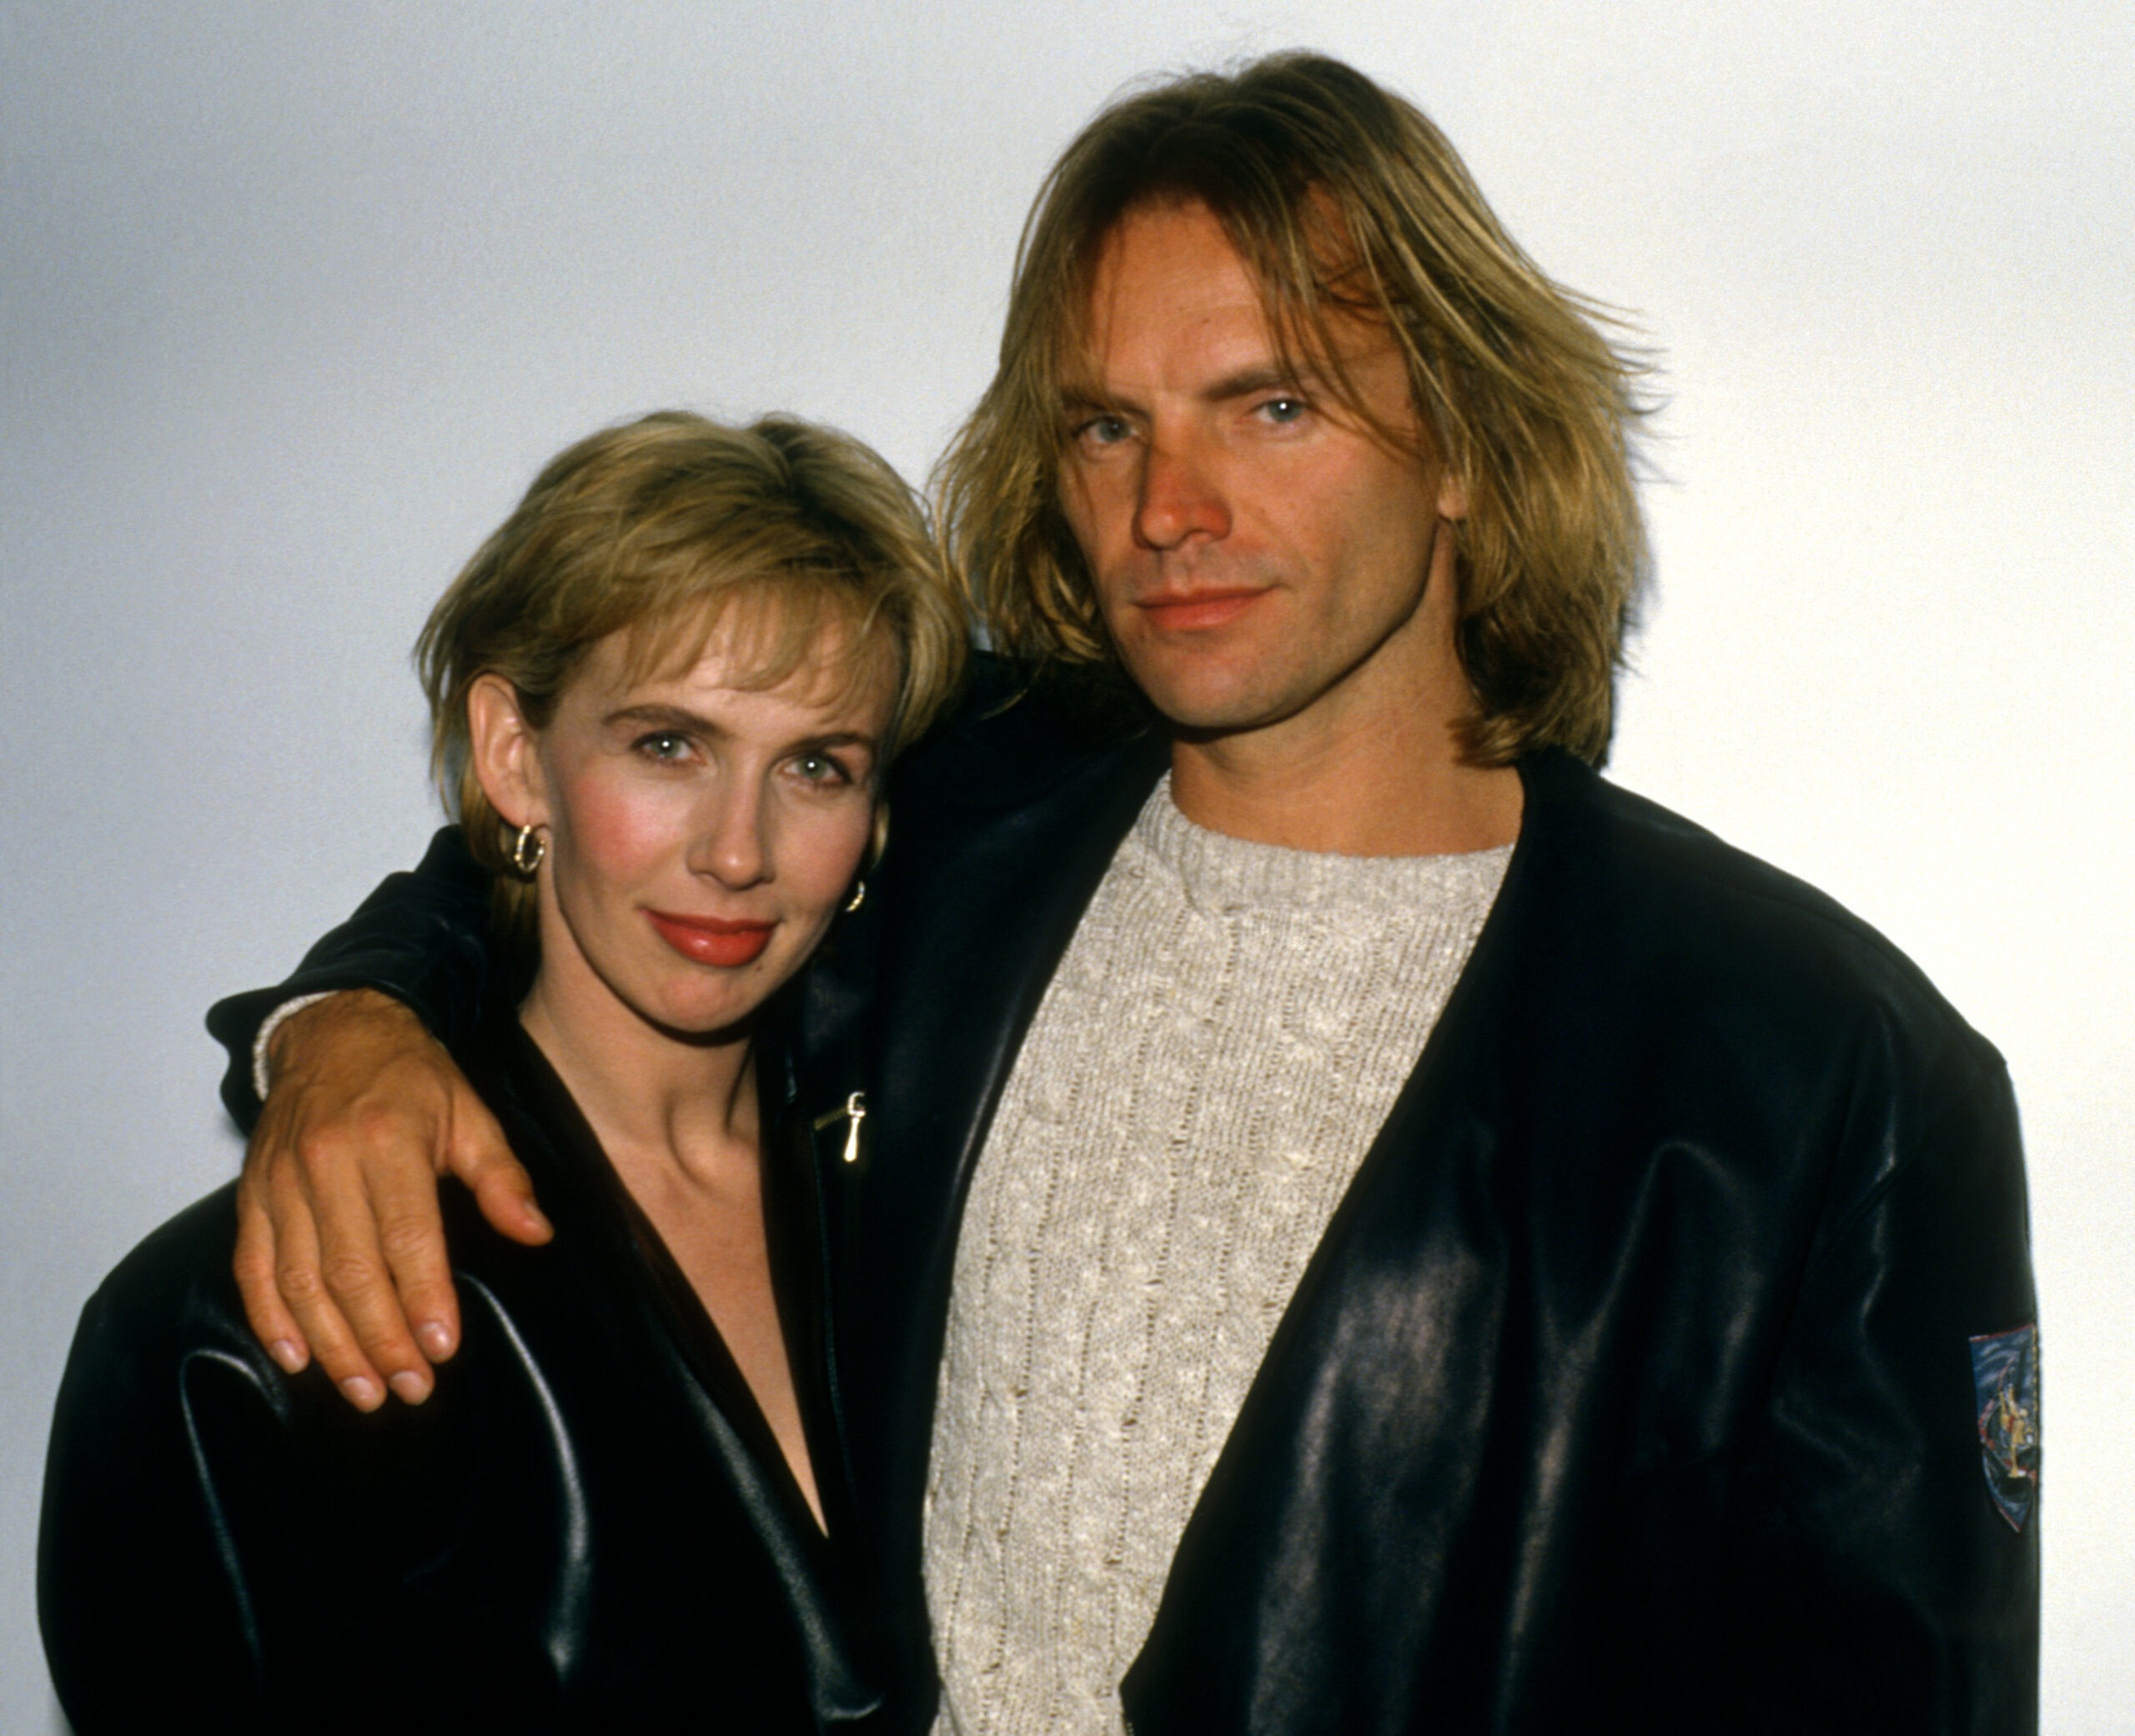 Trudie Styler and Sting pose for portrait on January 1, 1989 in Los Angeles, California. | Source: Getty Images